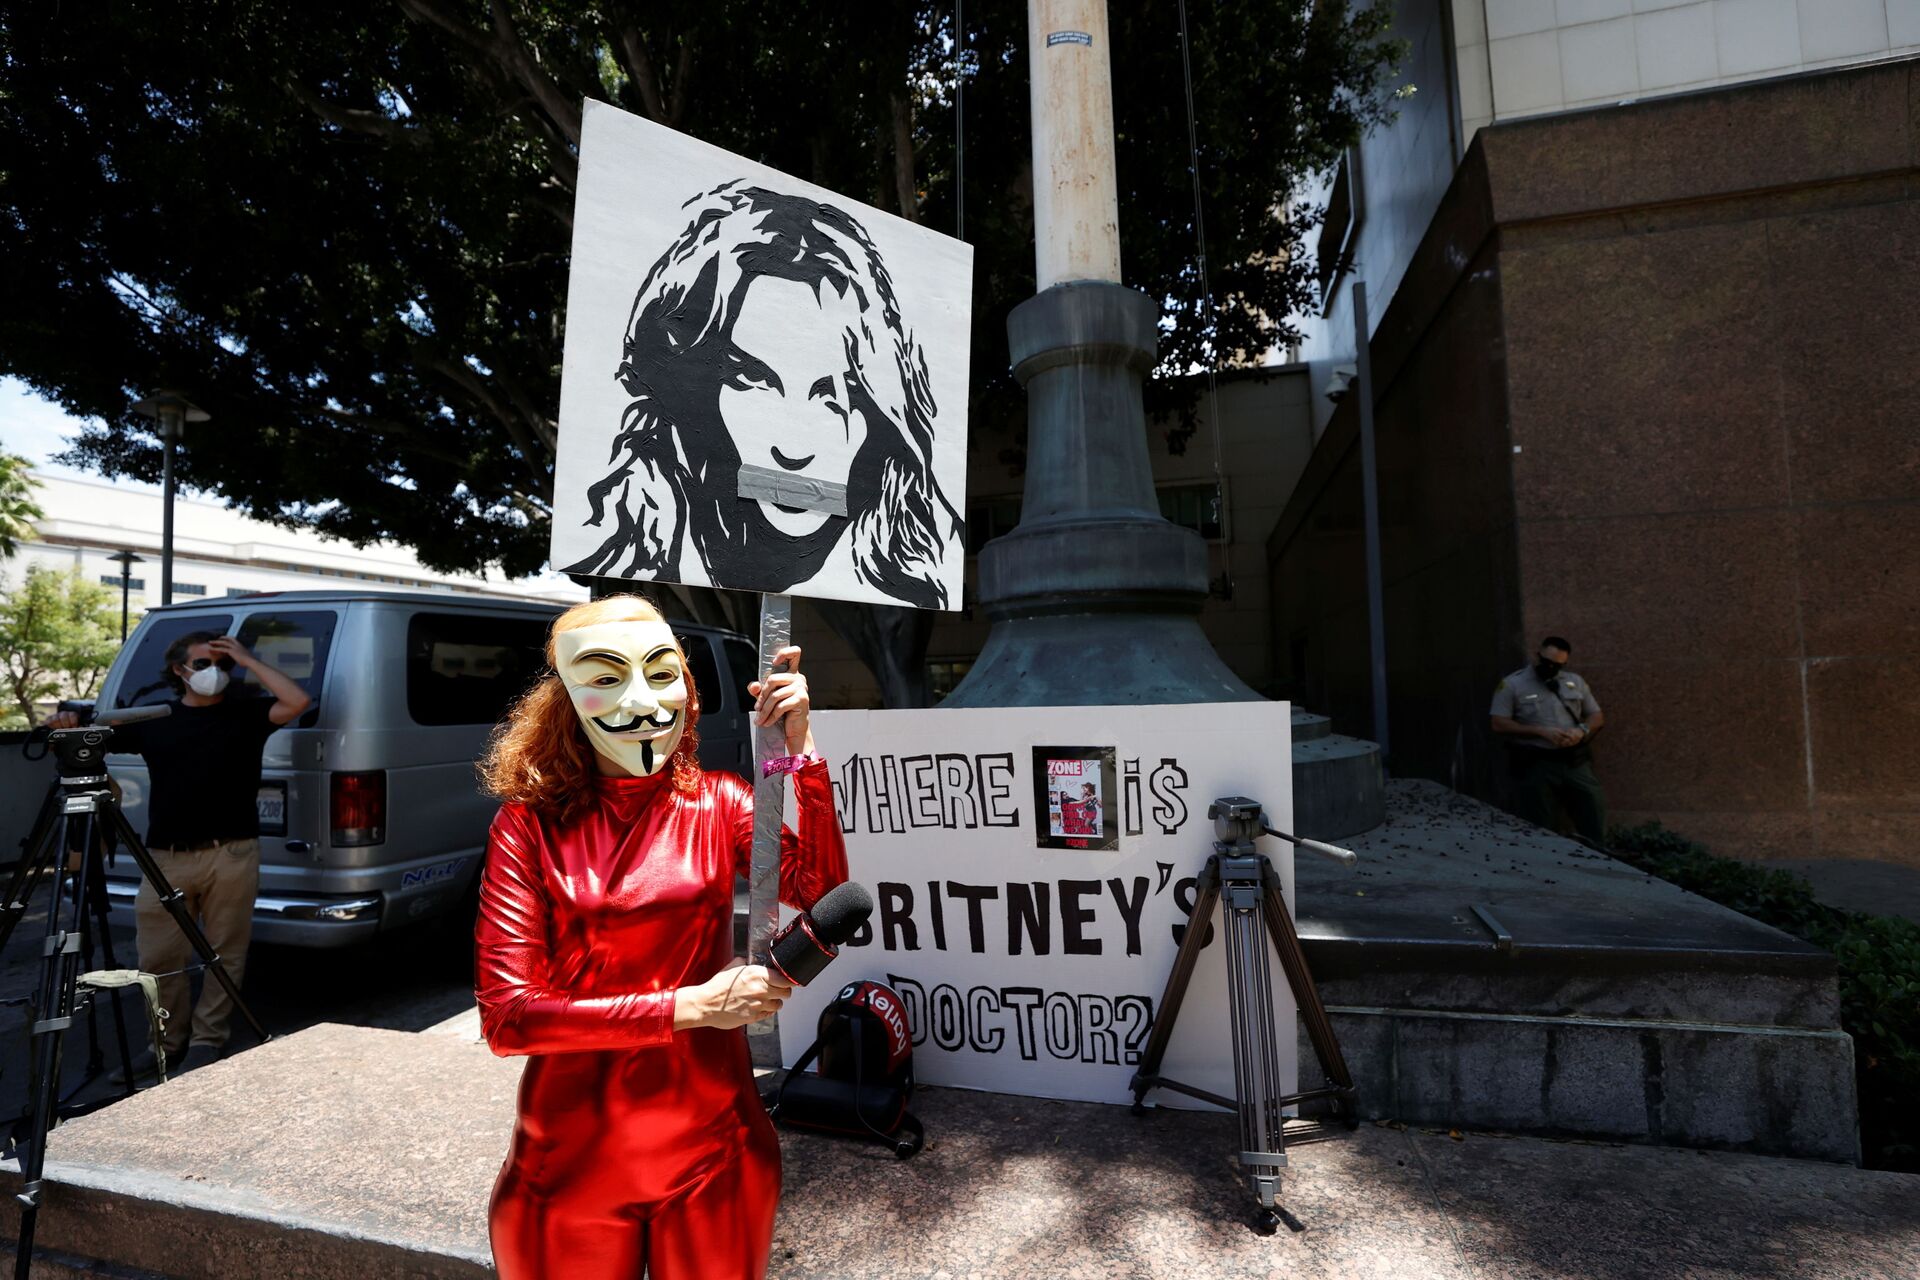 Gabriela Ruiz holding a sign protests in support of pop star Britney Spears on the day of a conservatorship case hearing at Stanley Mosk Courthouse in Los Angeles, California, U.S. June 23, 2021. - Sputnik International, 1920, 07.09.2021